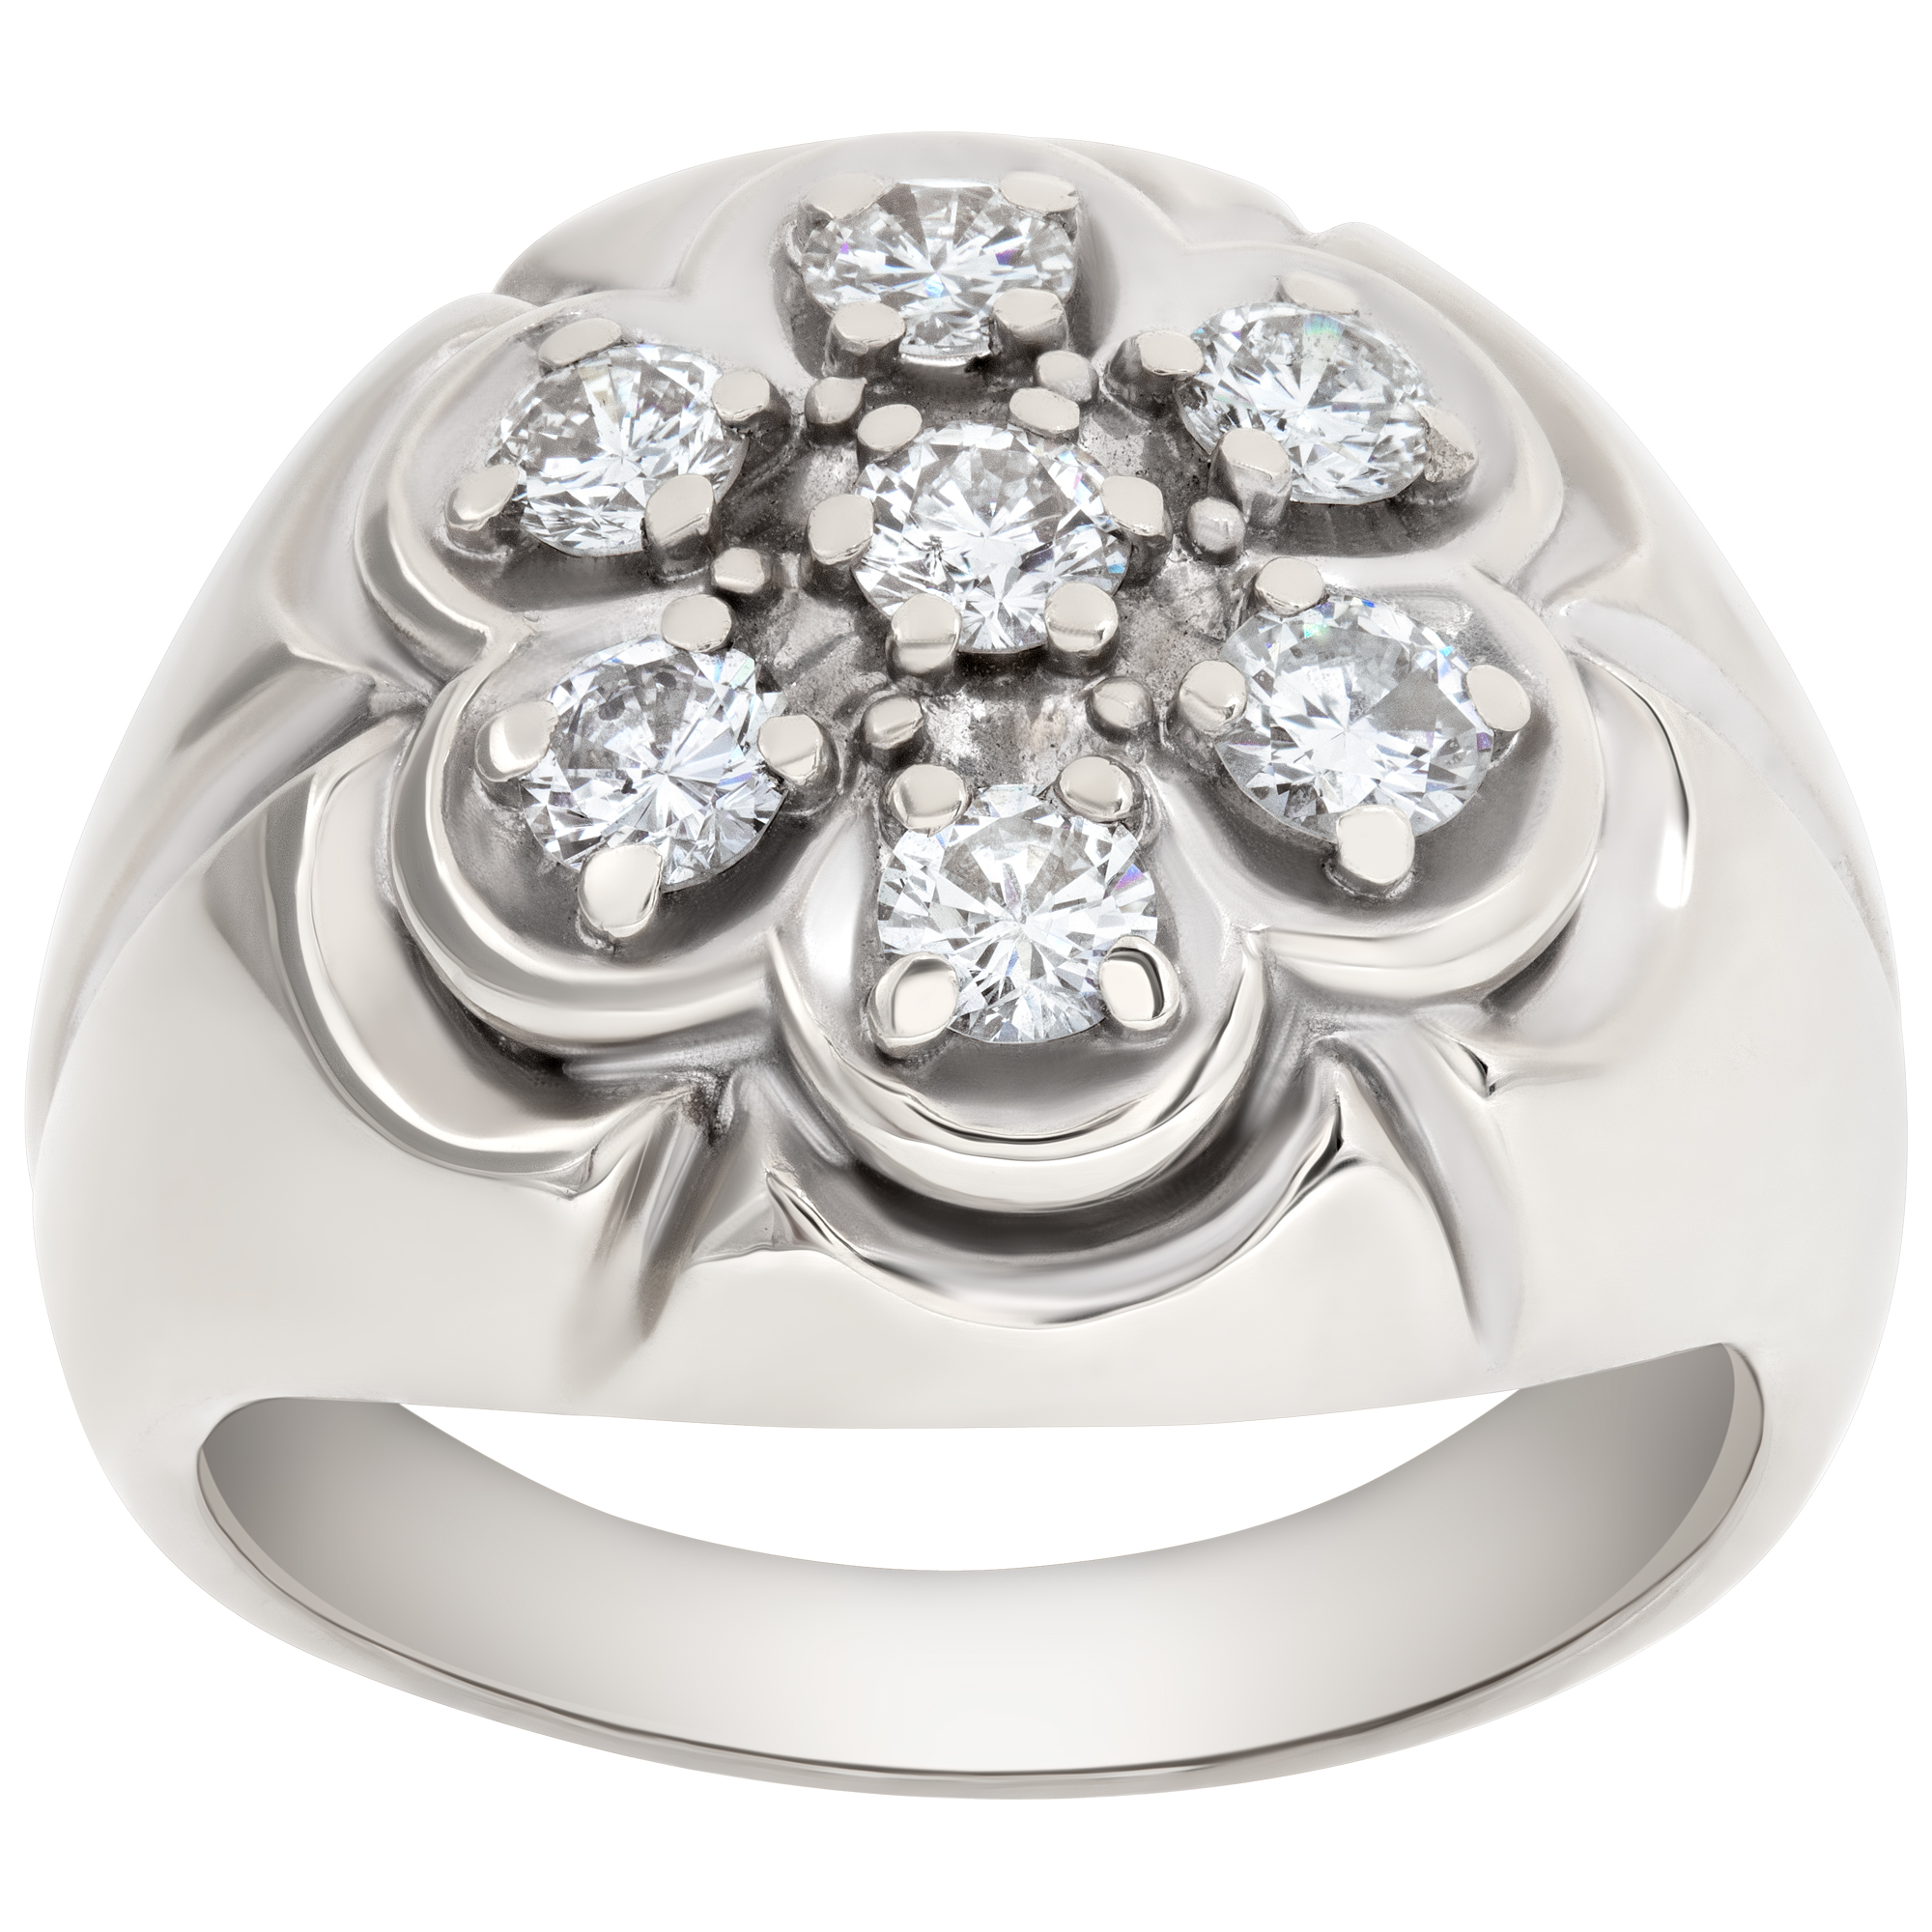 Cluster diamond ring in 14k white gold with approximately 1.00 carat round brilliant cut diamonds